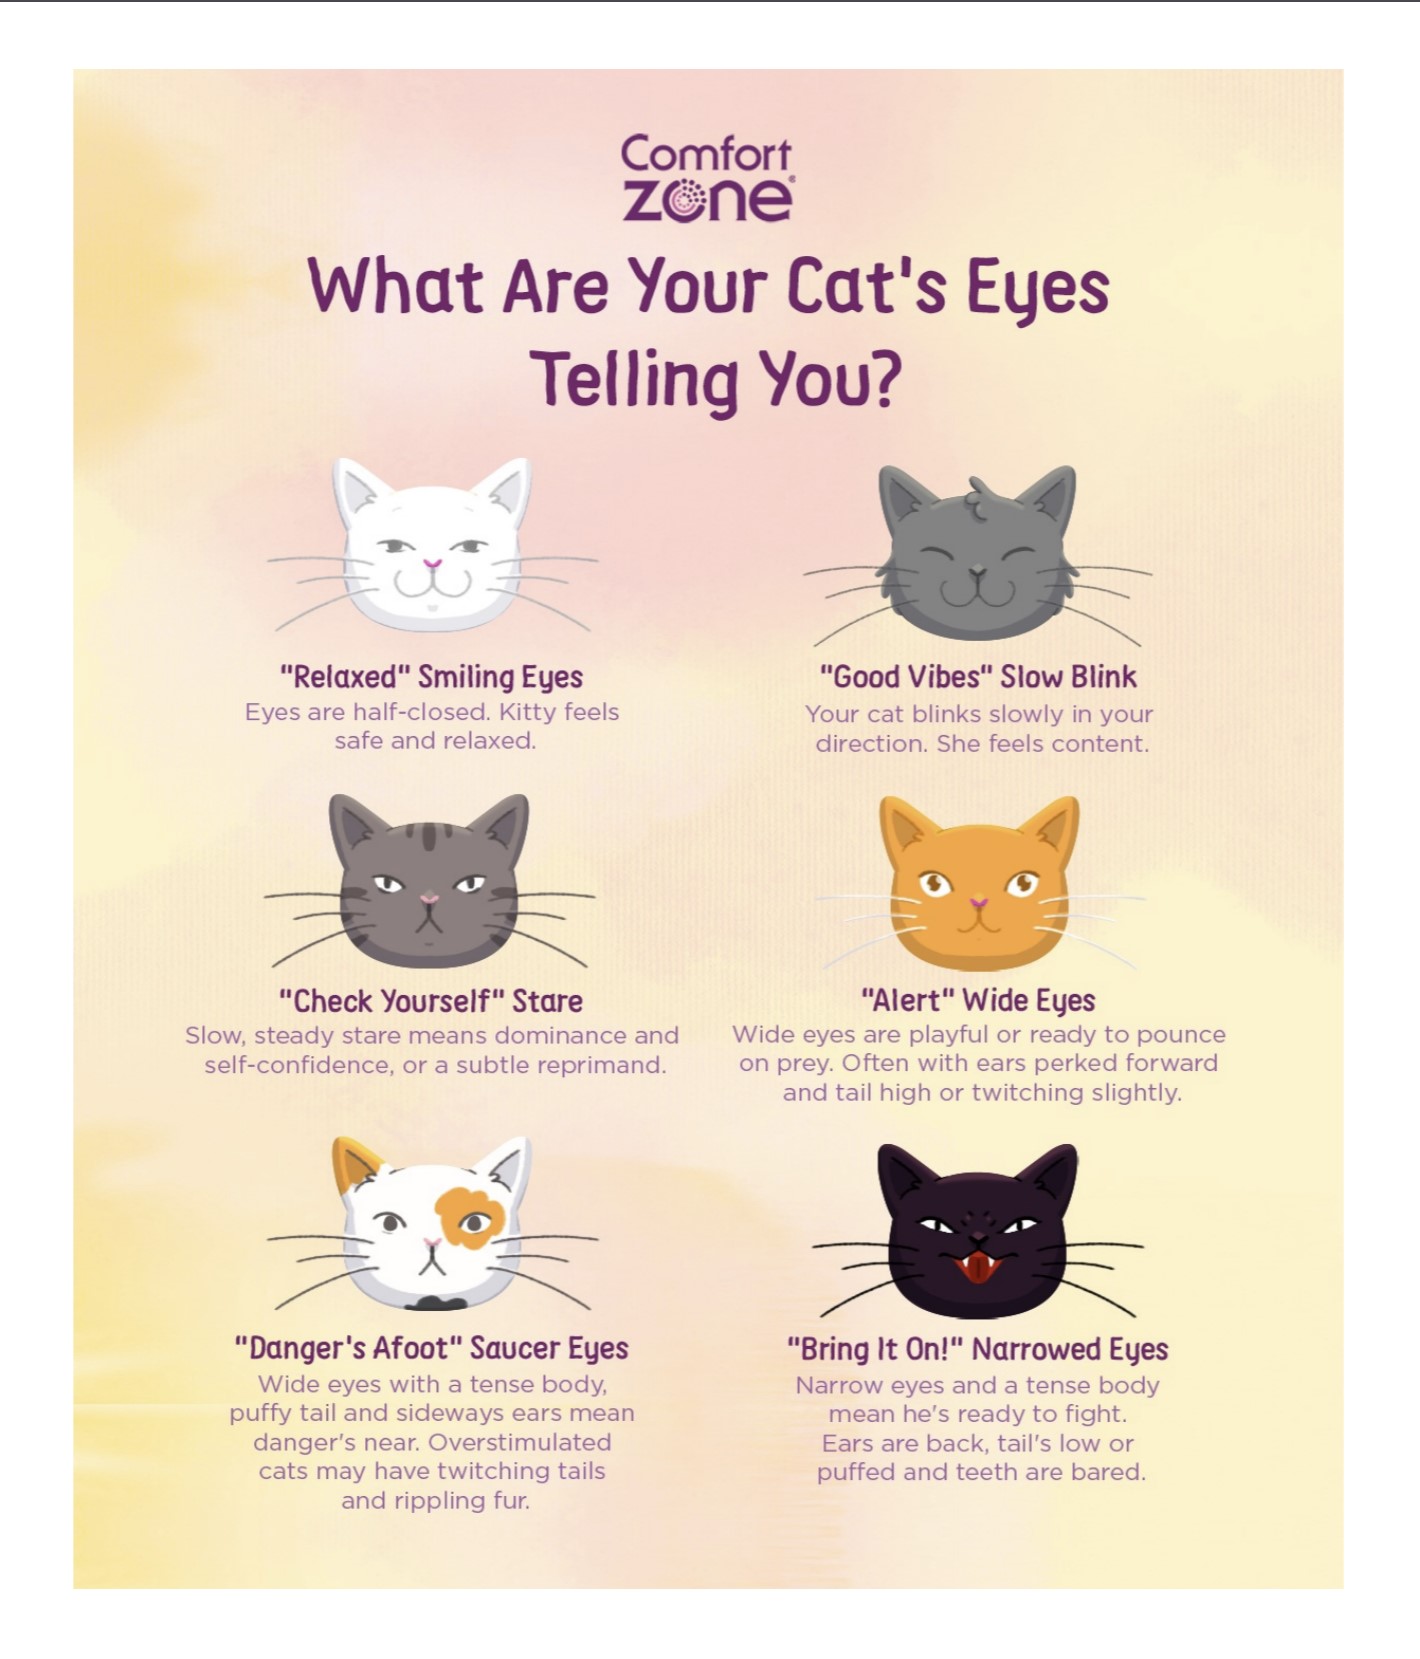 cat-eye-meaning-reading-your-cat-s-eyes-comfort-zone